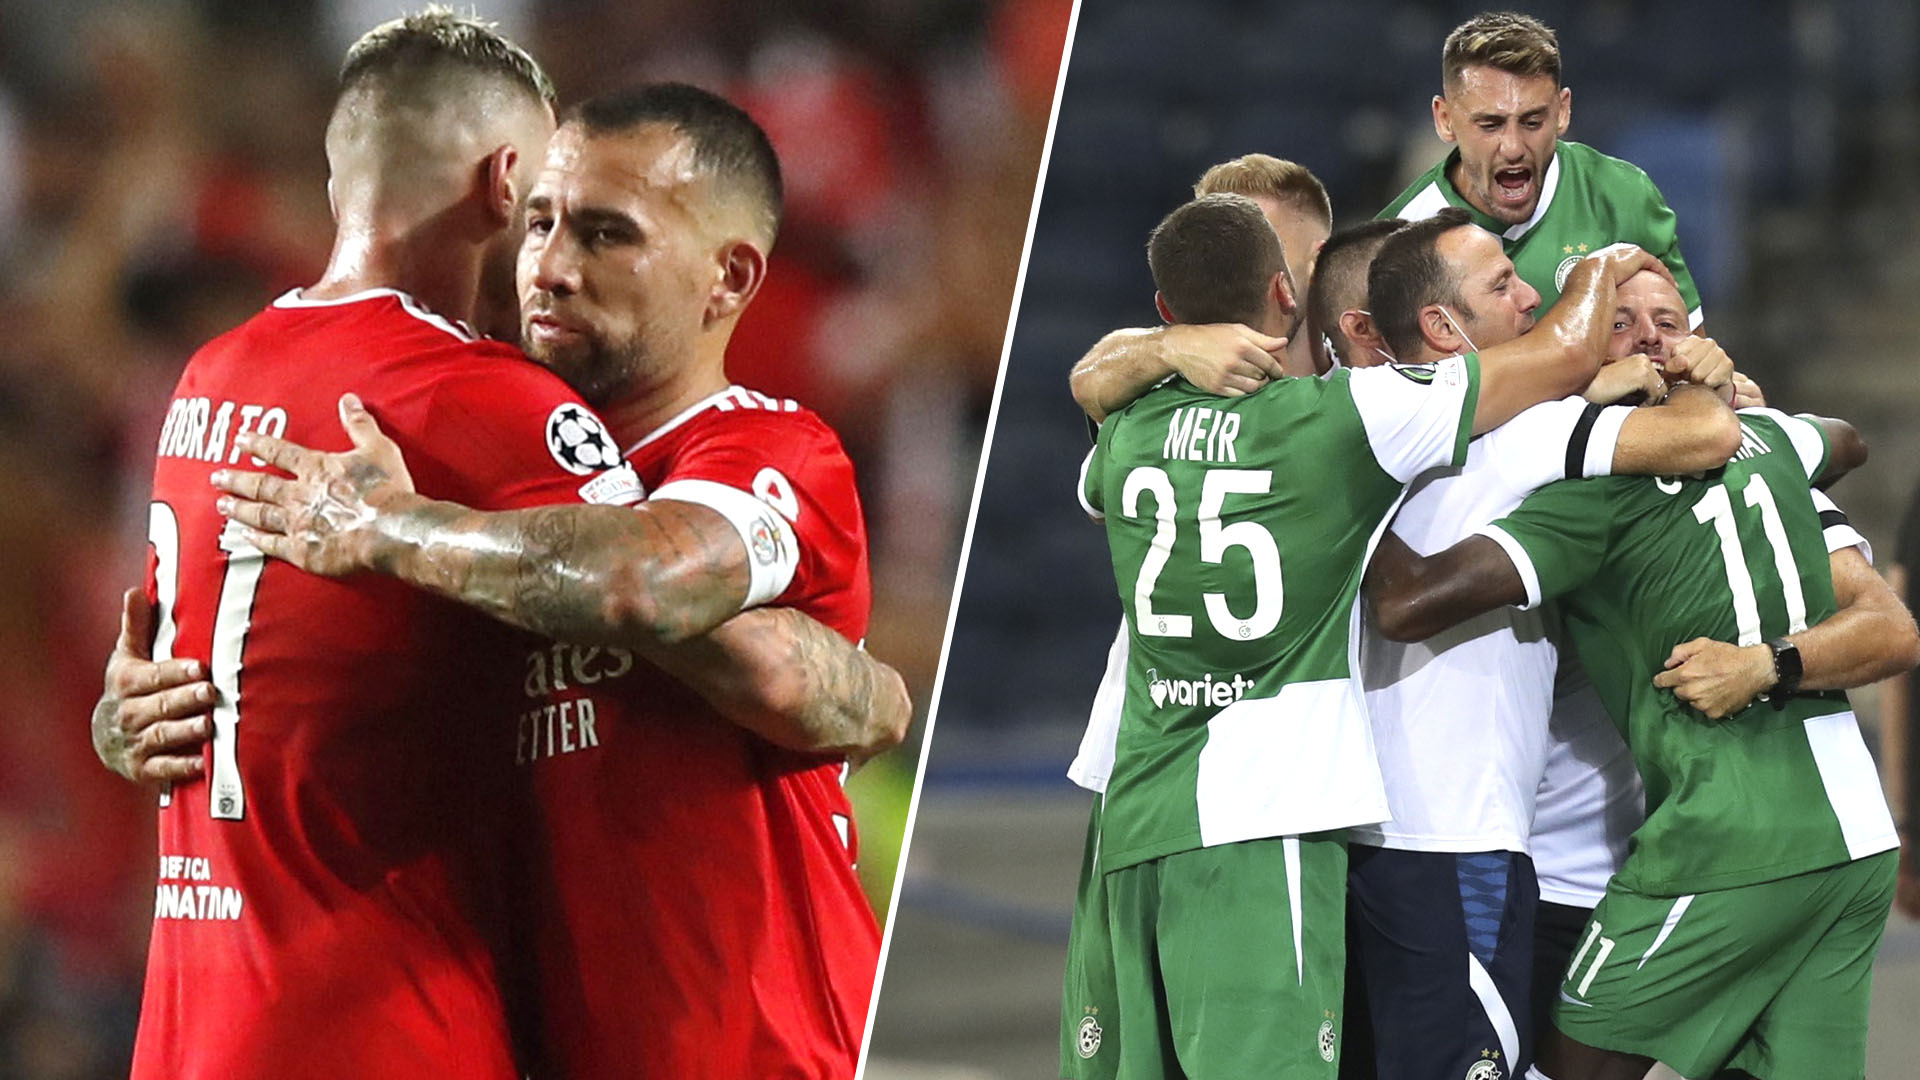 Otamendi'S Benfica Will Play Maccabi Haifa On The First Date Of The 2022/23 Uefa Champions League.